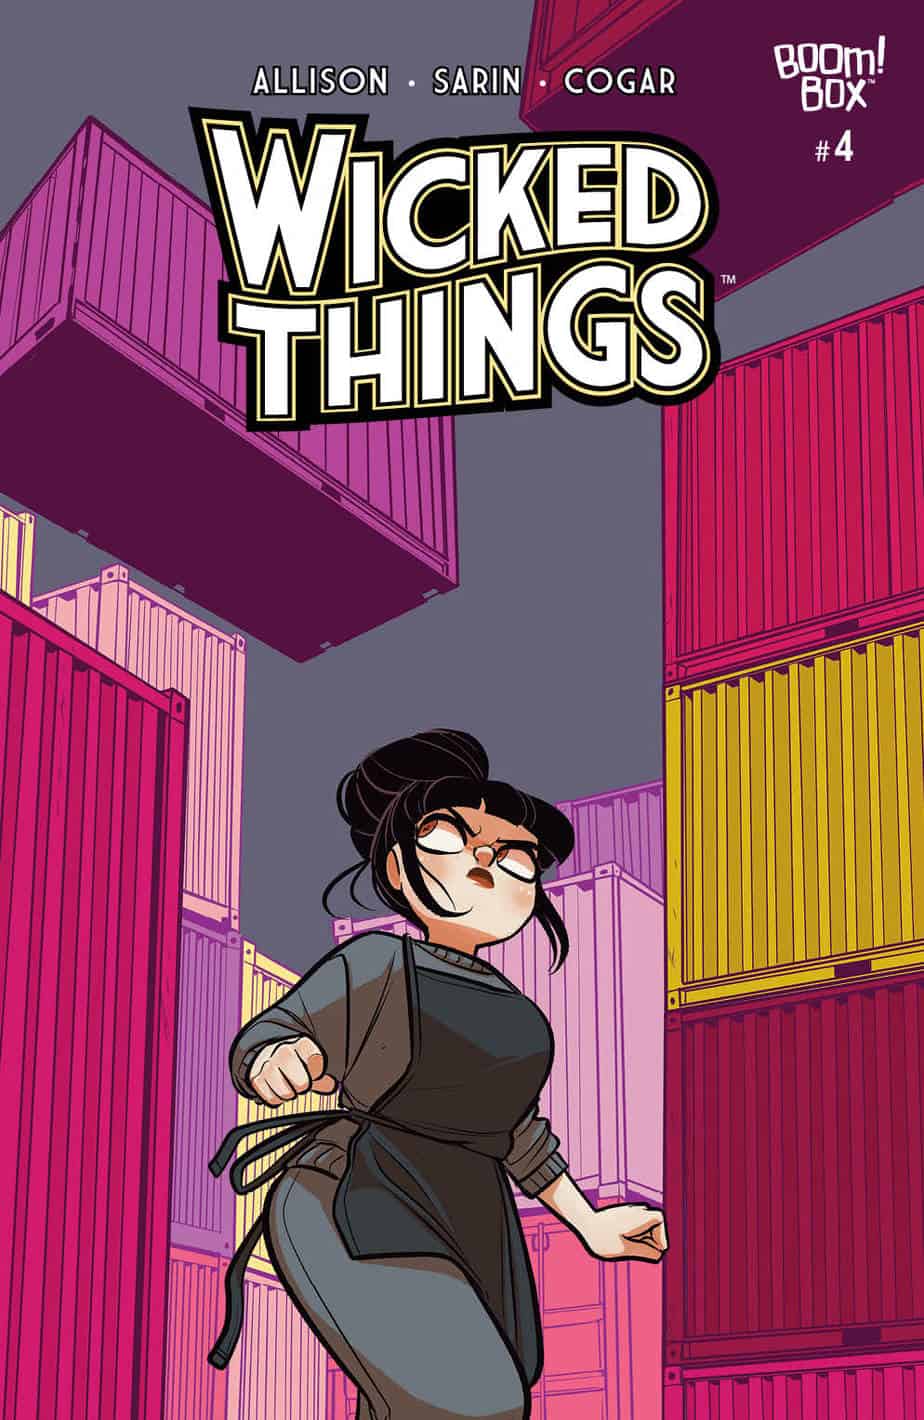 WICKED THINGS #4 - Main Cover